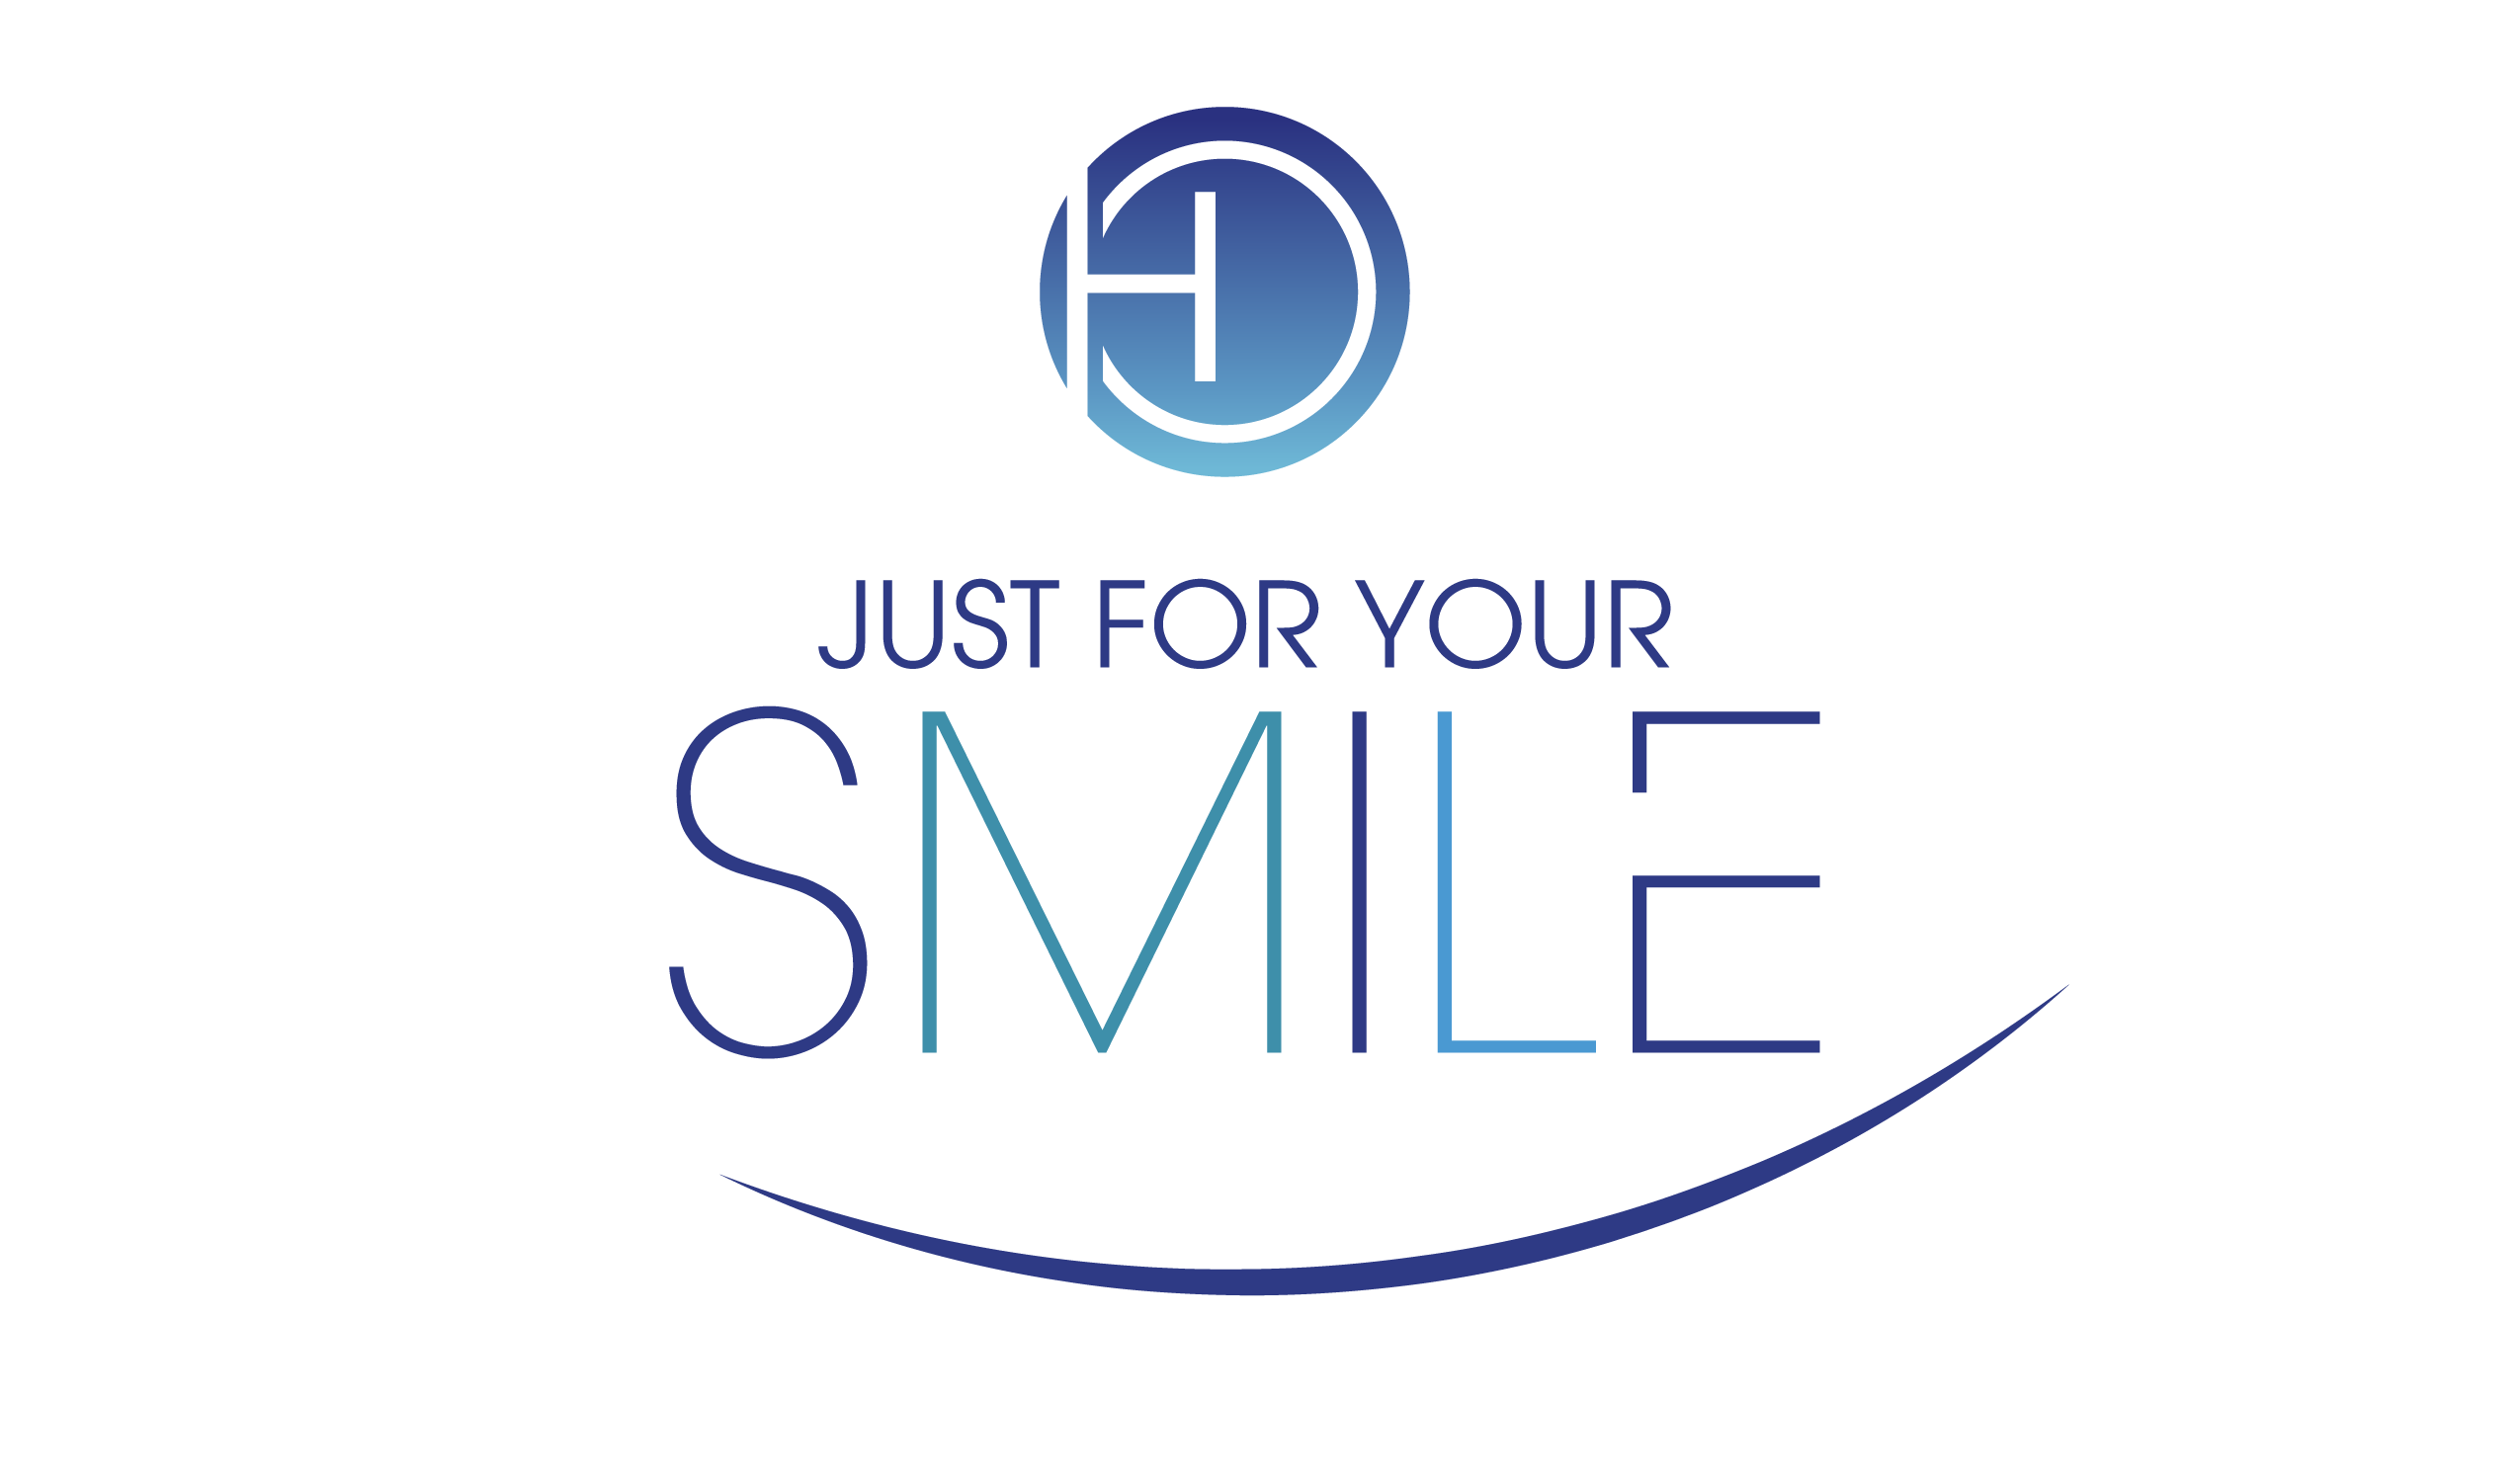 Visit Just For Your Smile Dental Clinic of Potomac